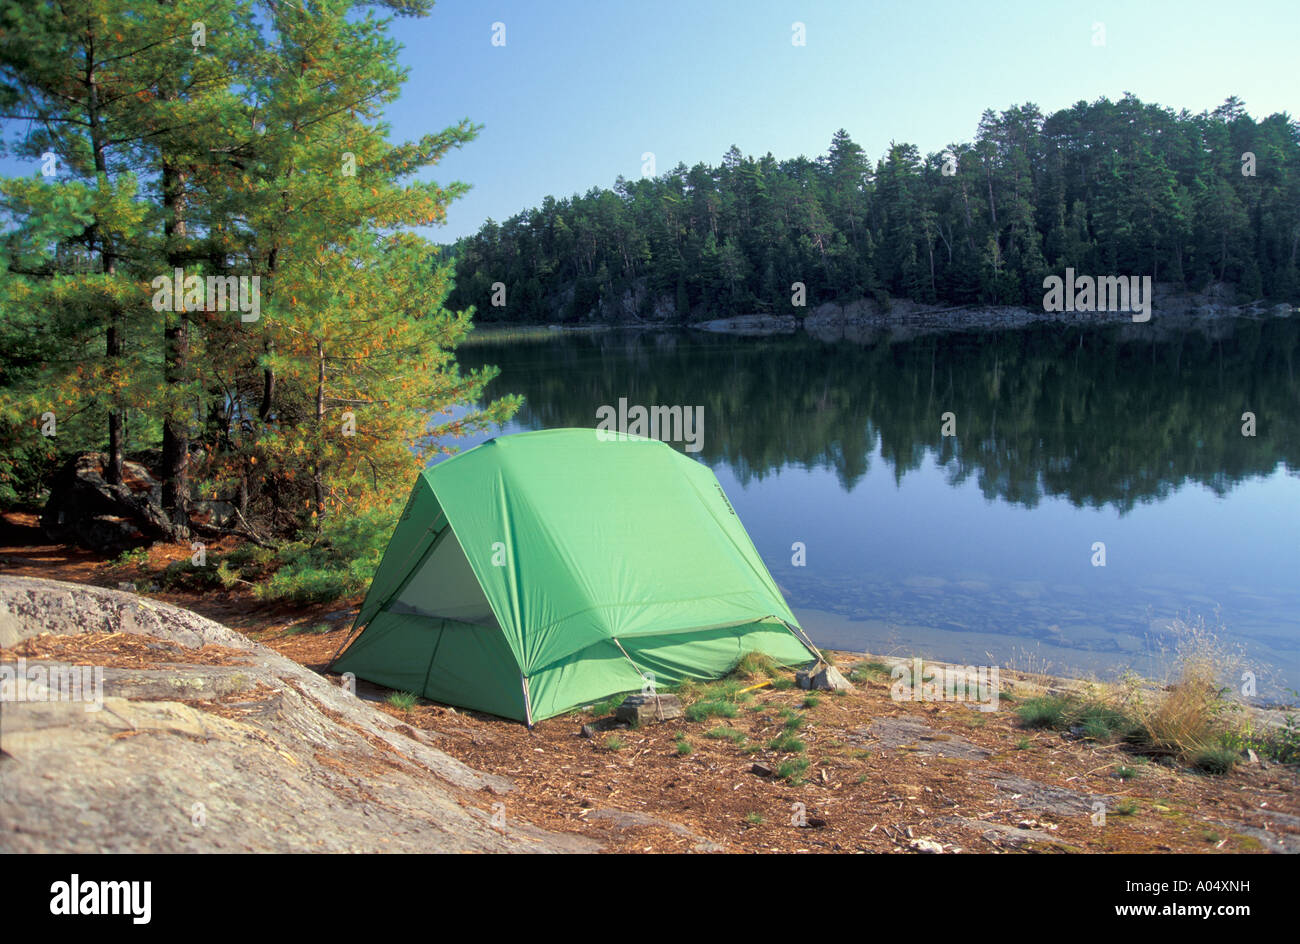 Forventer overskridelsen Distrahere Tent, camping site, Lady Evelyn lake, Lady Evelyn Smoothwater Wilderness  Park, Temagami Region, Ontario, Canada, Royalty Free Stock Photo - Alamy